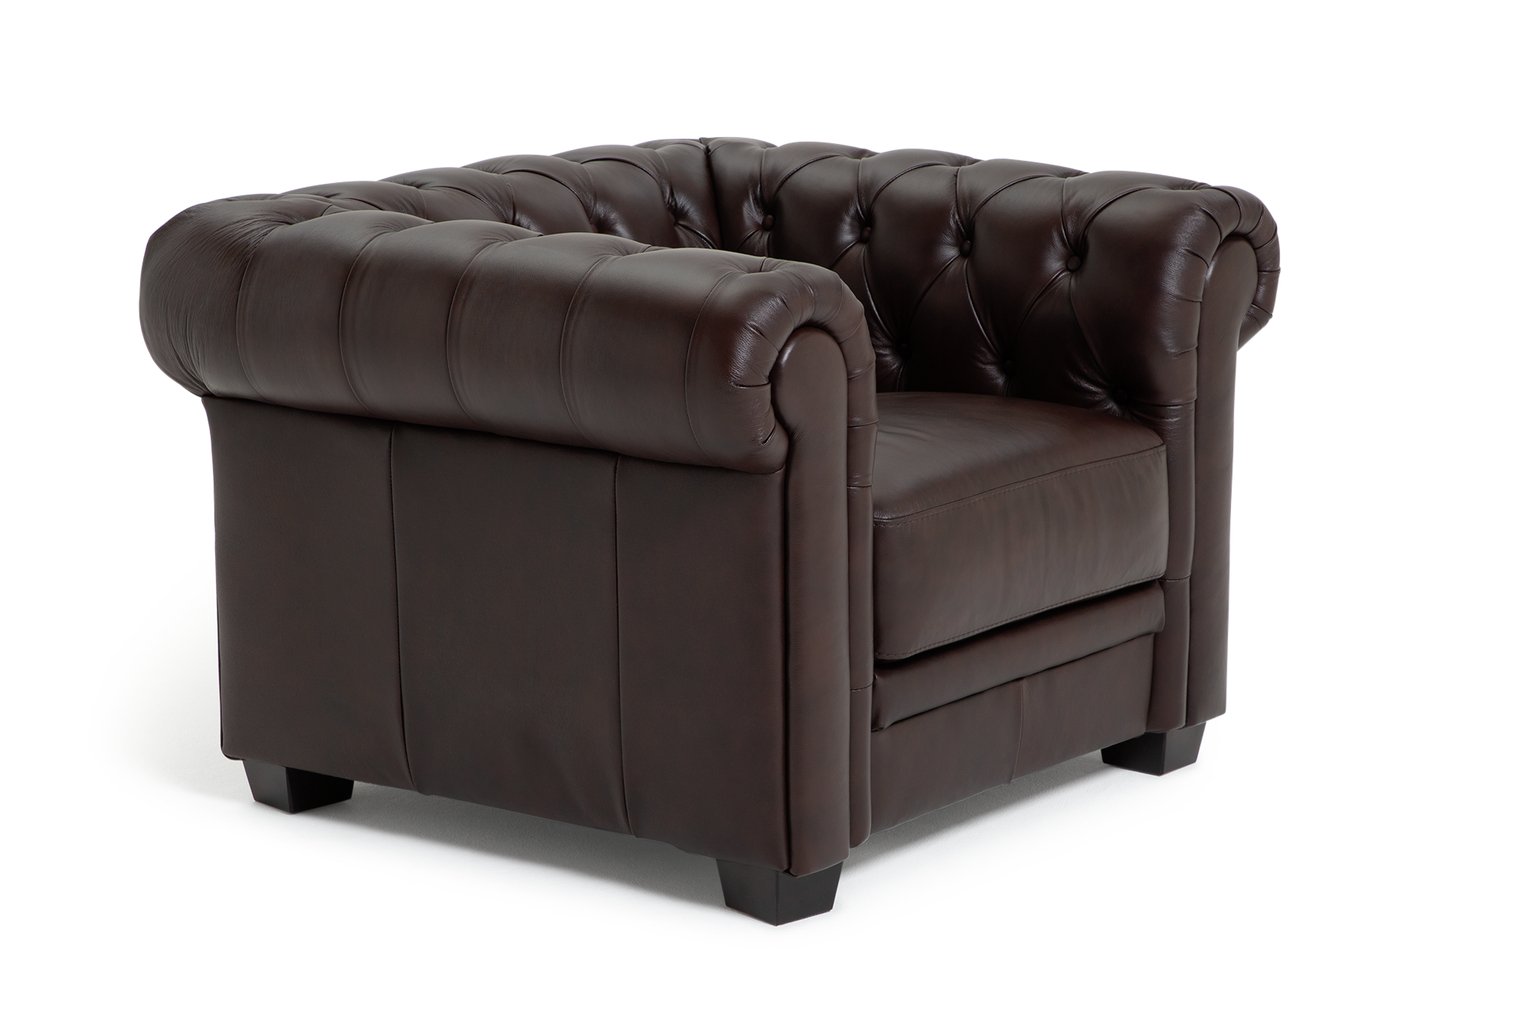 Argos Home - Chesterfield - Leather Chair Reviews